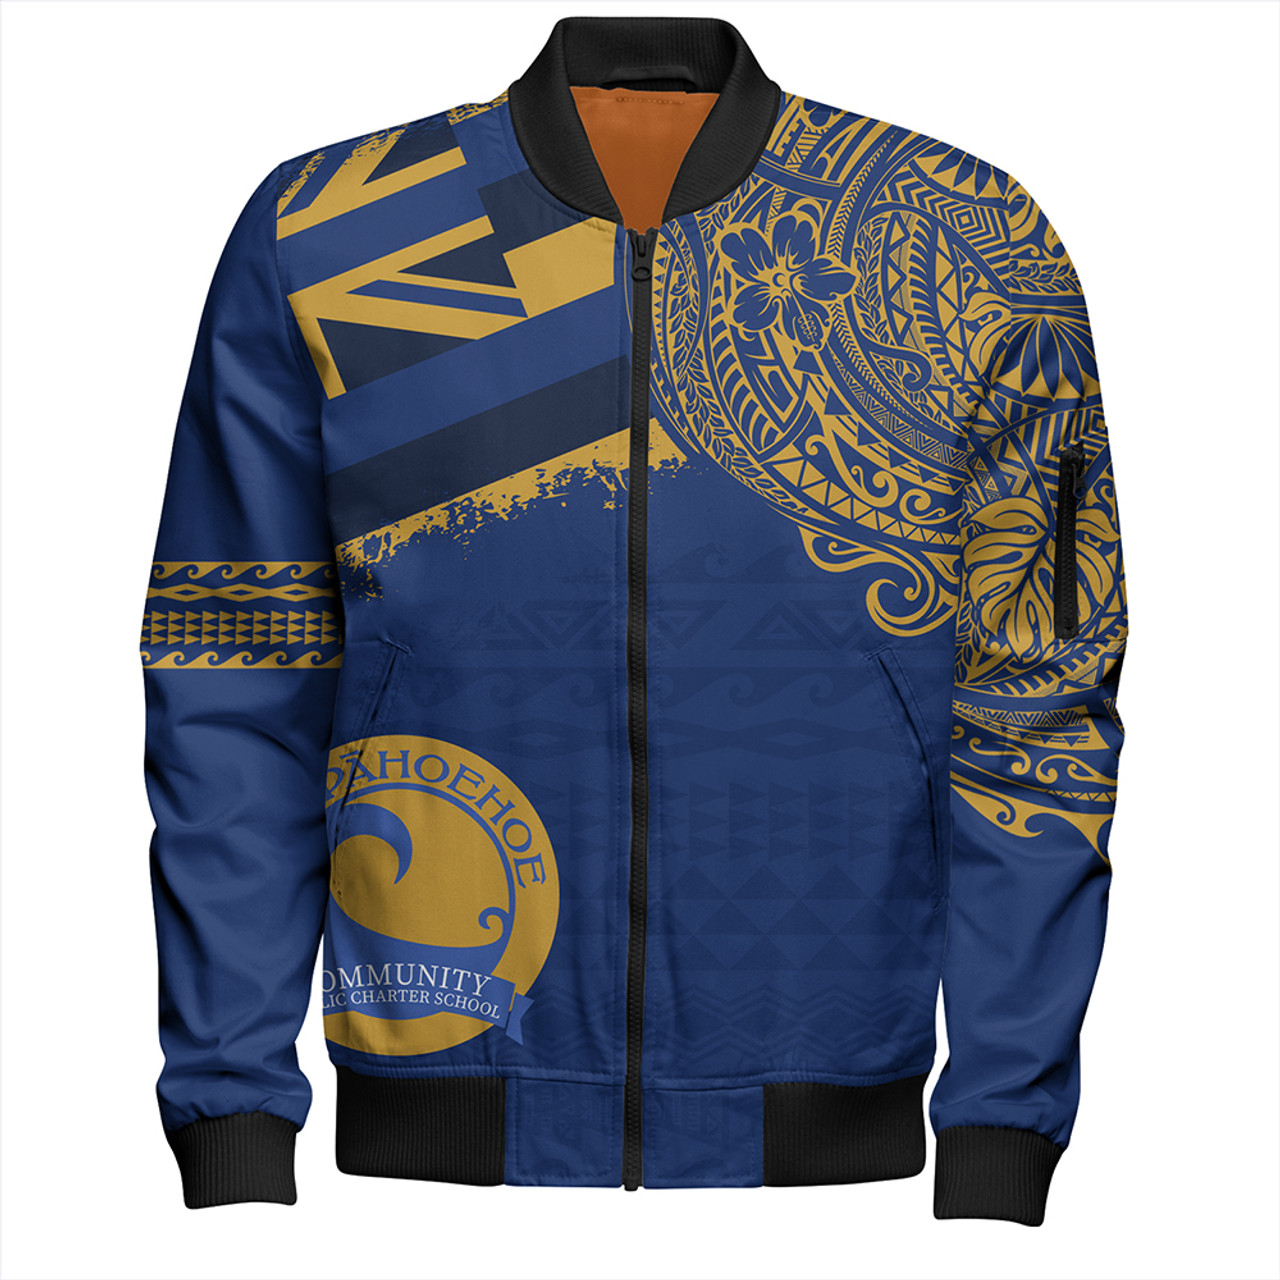 Hawaii Bomber Jacket Laupahoehoe Community Public Charter High School With Crest Style